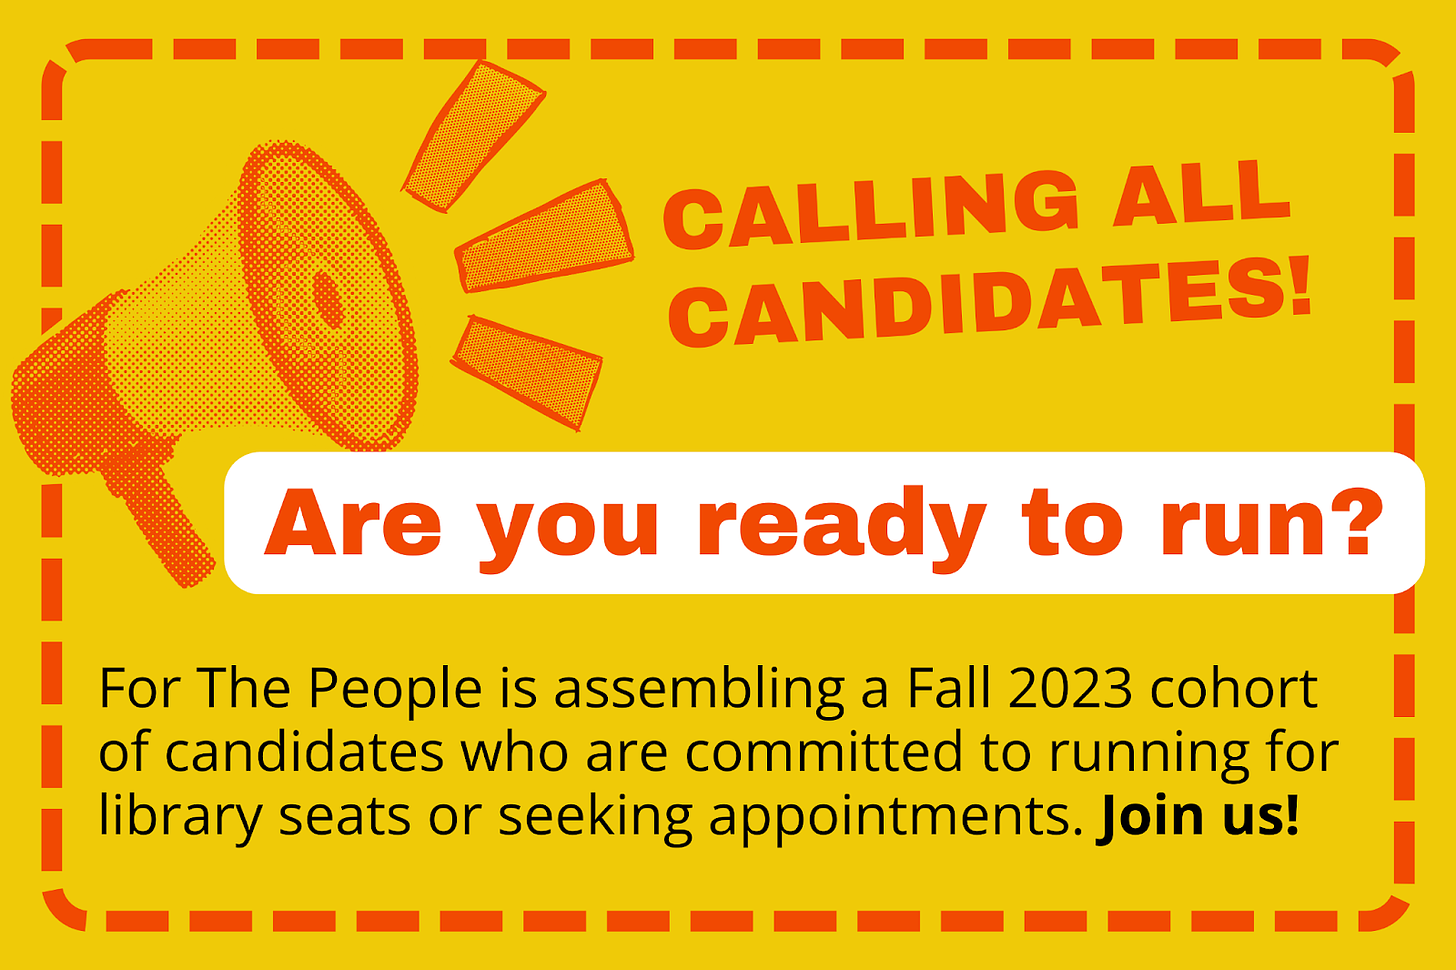 A bright yellow background with orange dashes along the border. An orange megaphone with sound lines points towards orange text that reads "Calling all candidates! Are you ready to run?" Below this in black font reads "For the People is assembling a Fall 2023 cohort for candidates who are committed to running for library seats or seeking appointments. Join us"